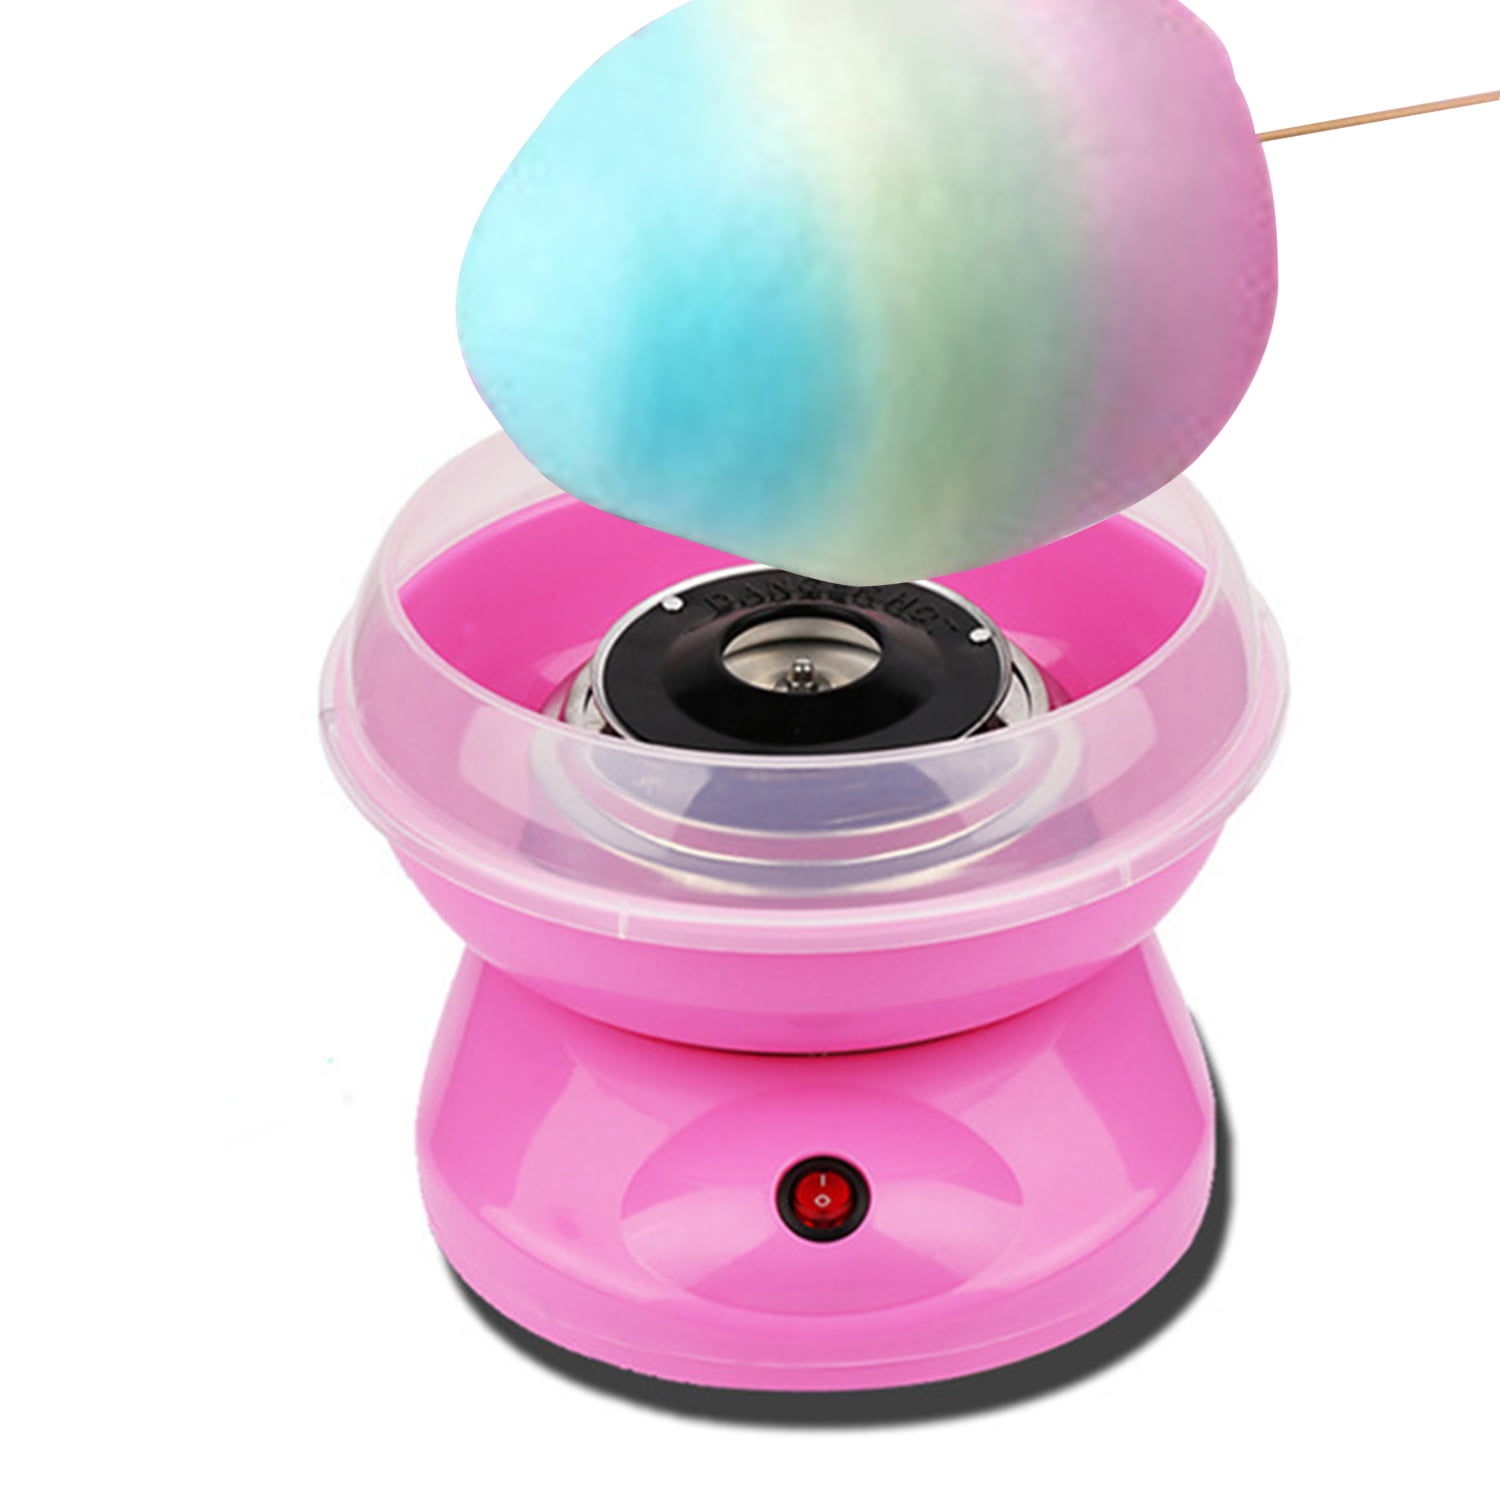 TM Small Cotton Candy Machine Electric Trolley Shaped Sugar Floss Maker Party DIY Supplies Gift for Kids H.eternal 